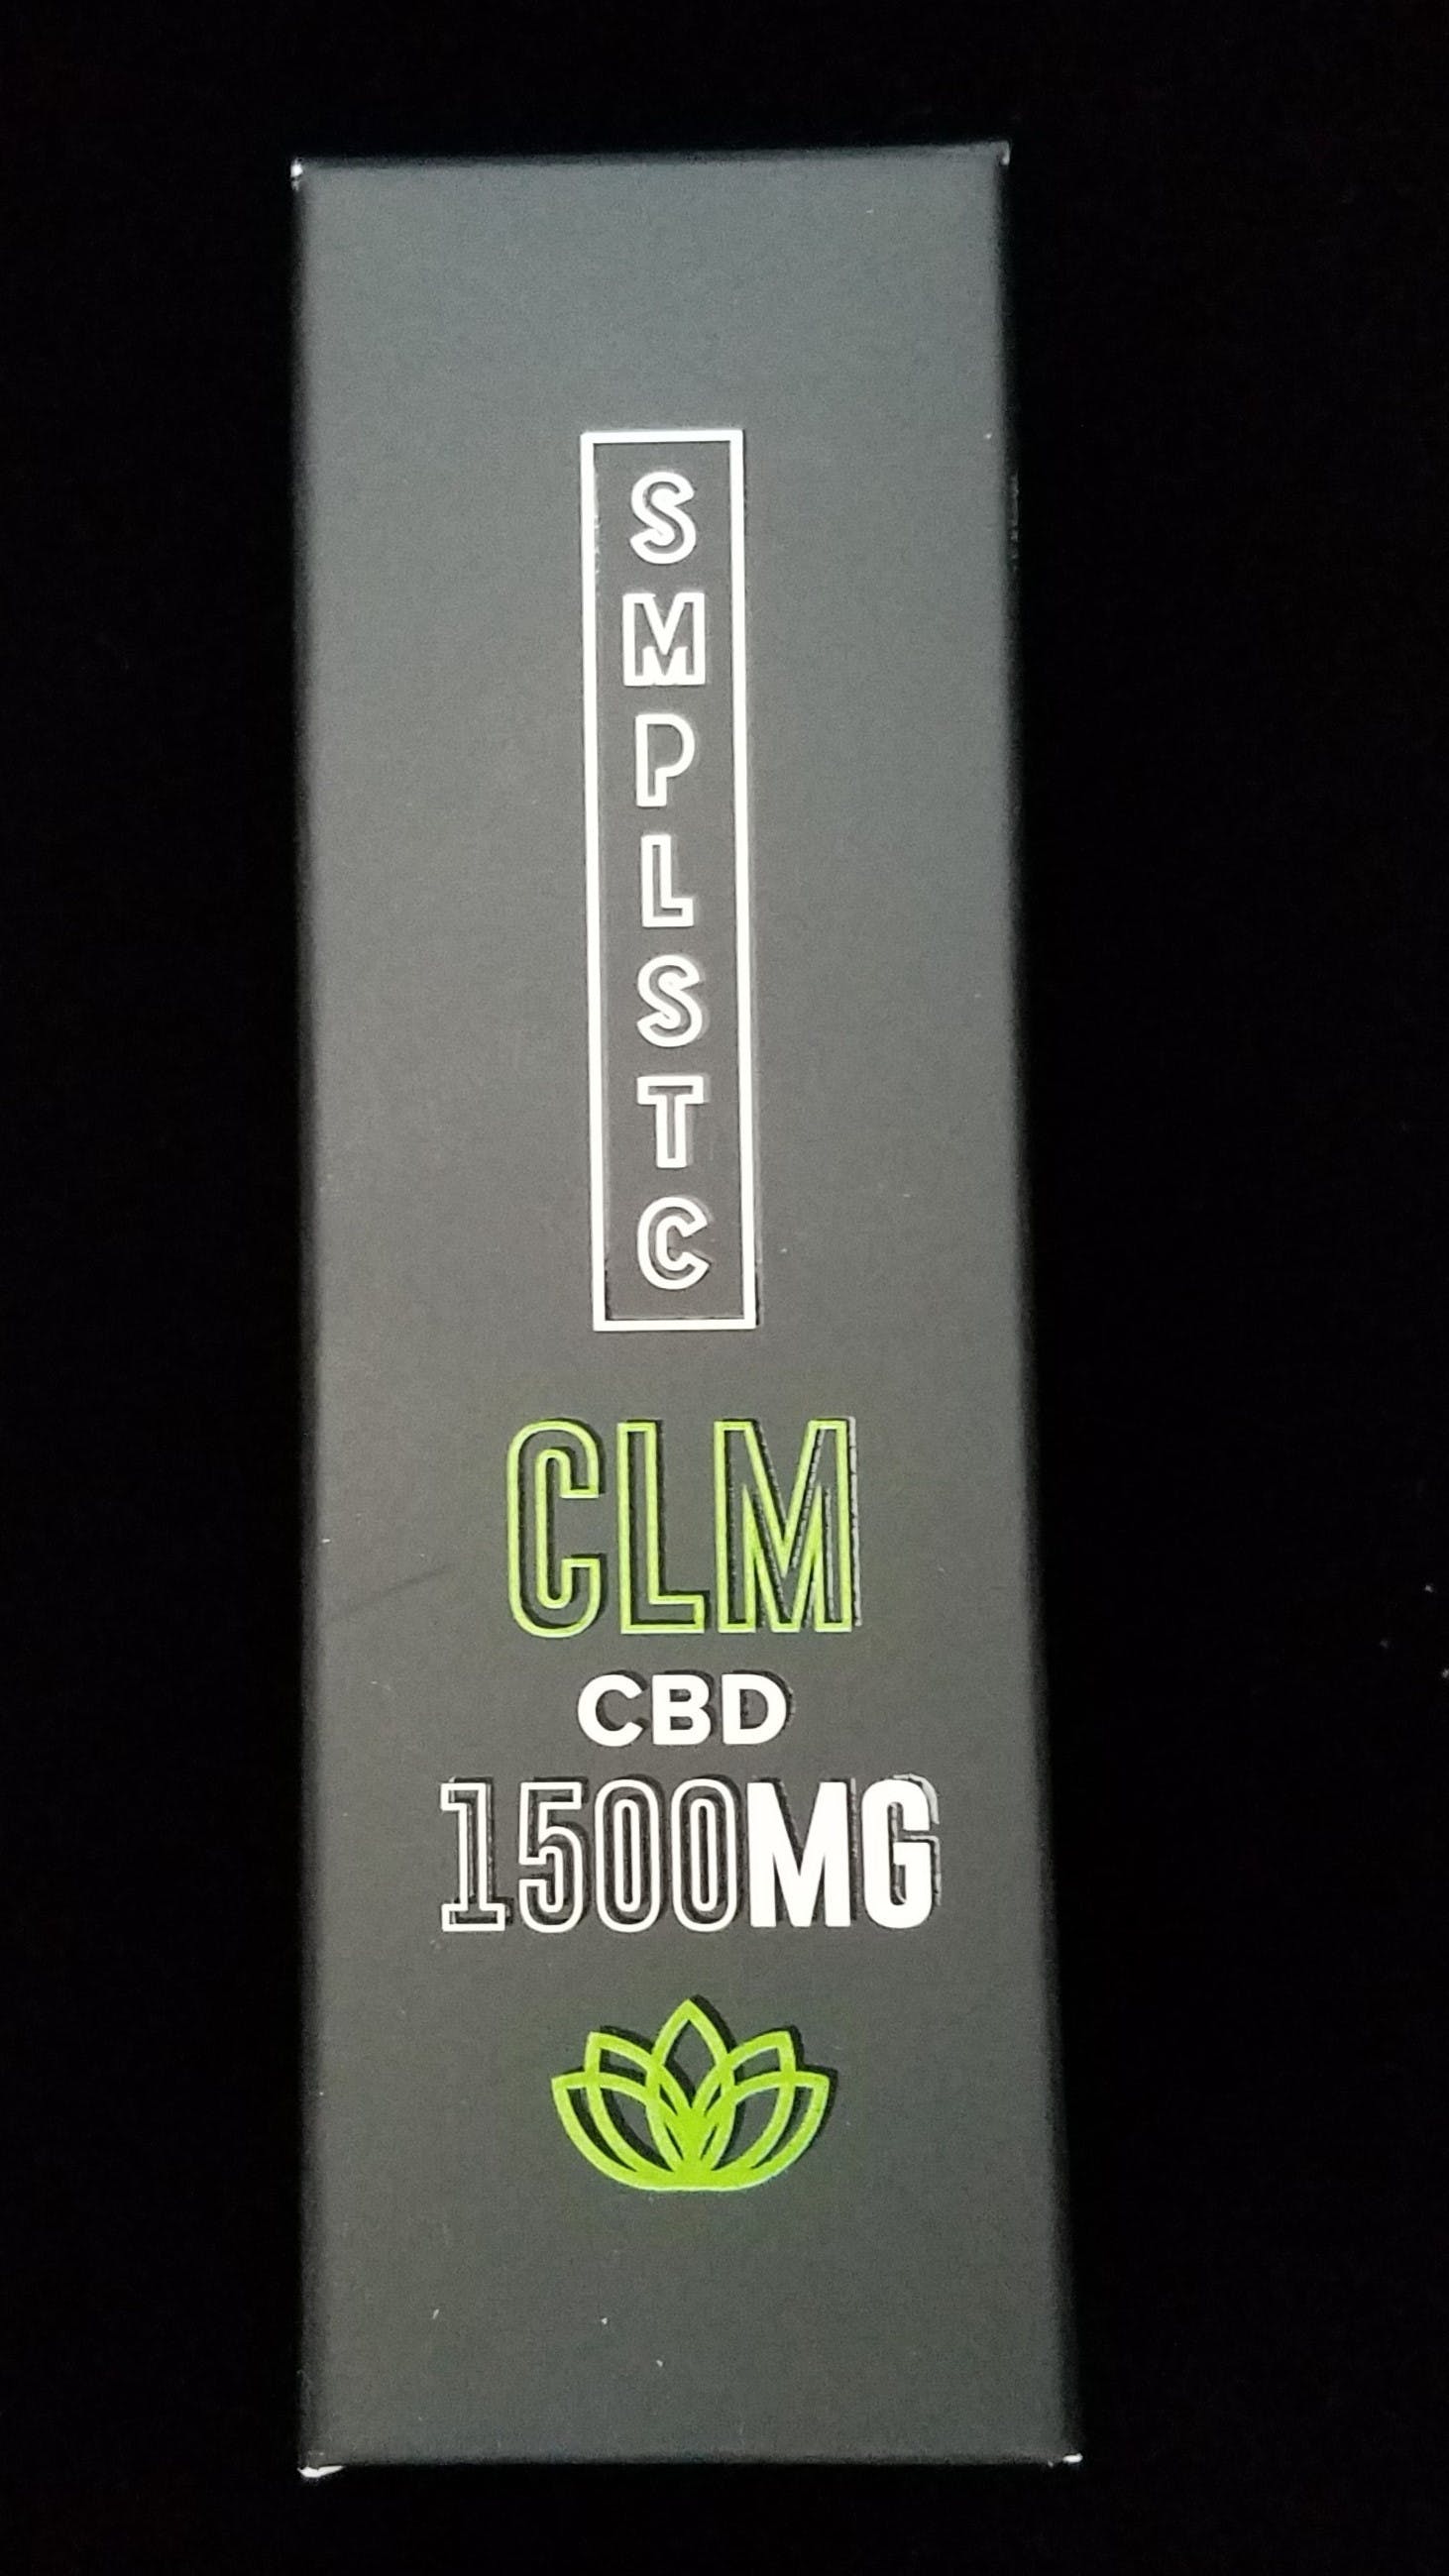 tincture-smplstc-clm-1500mg